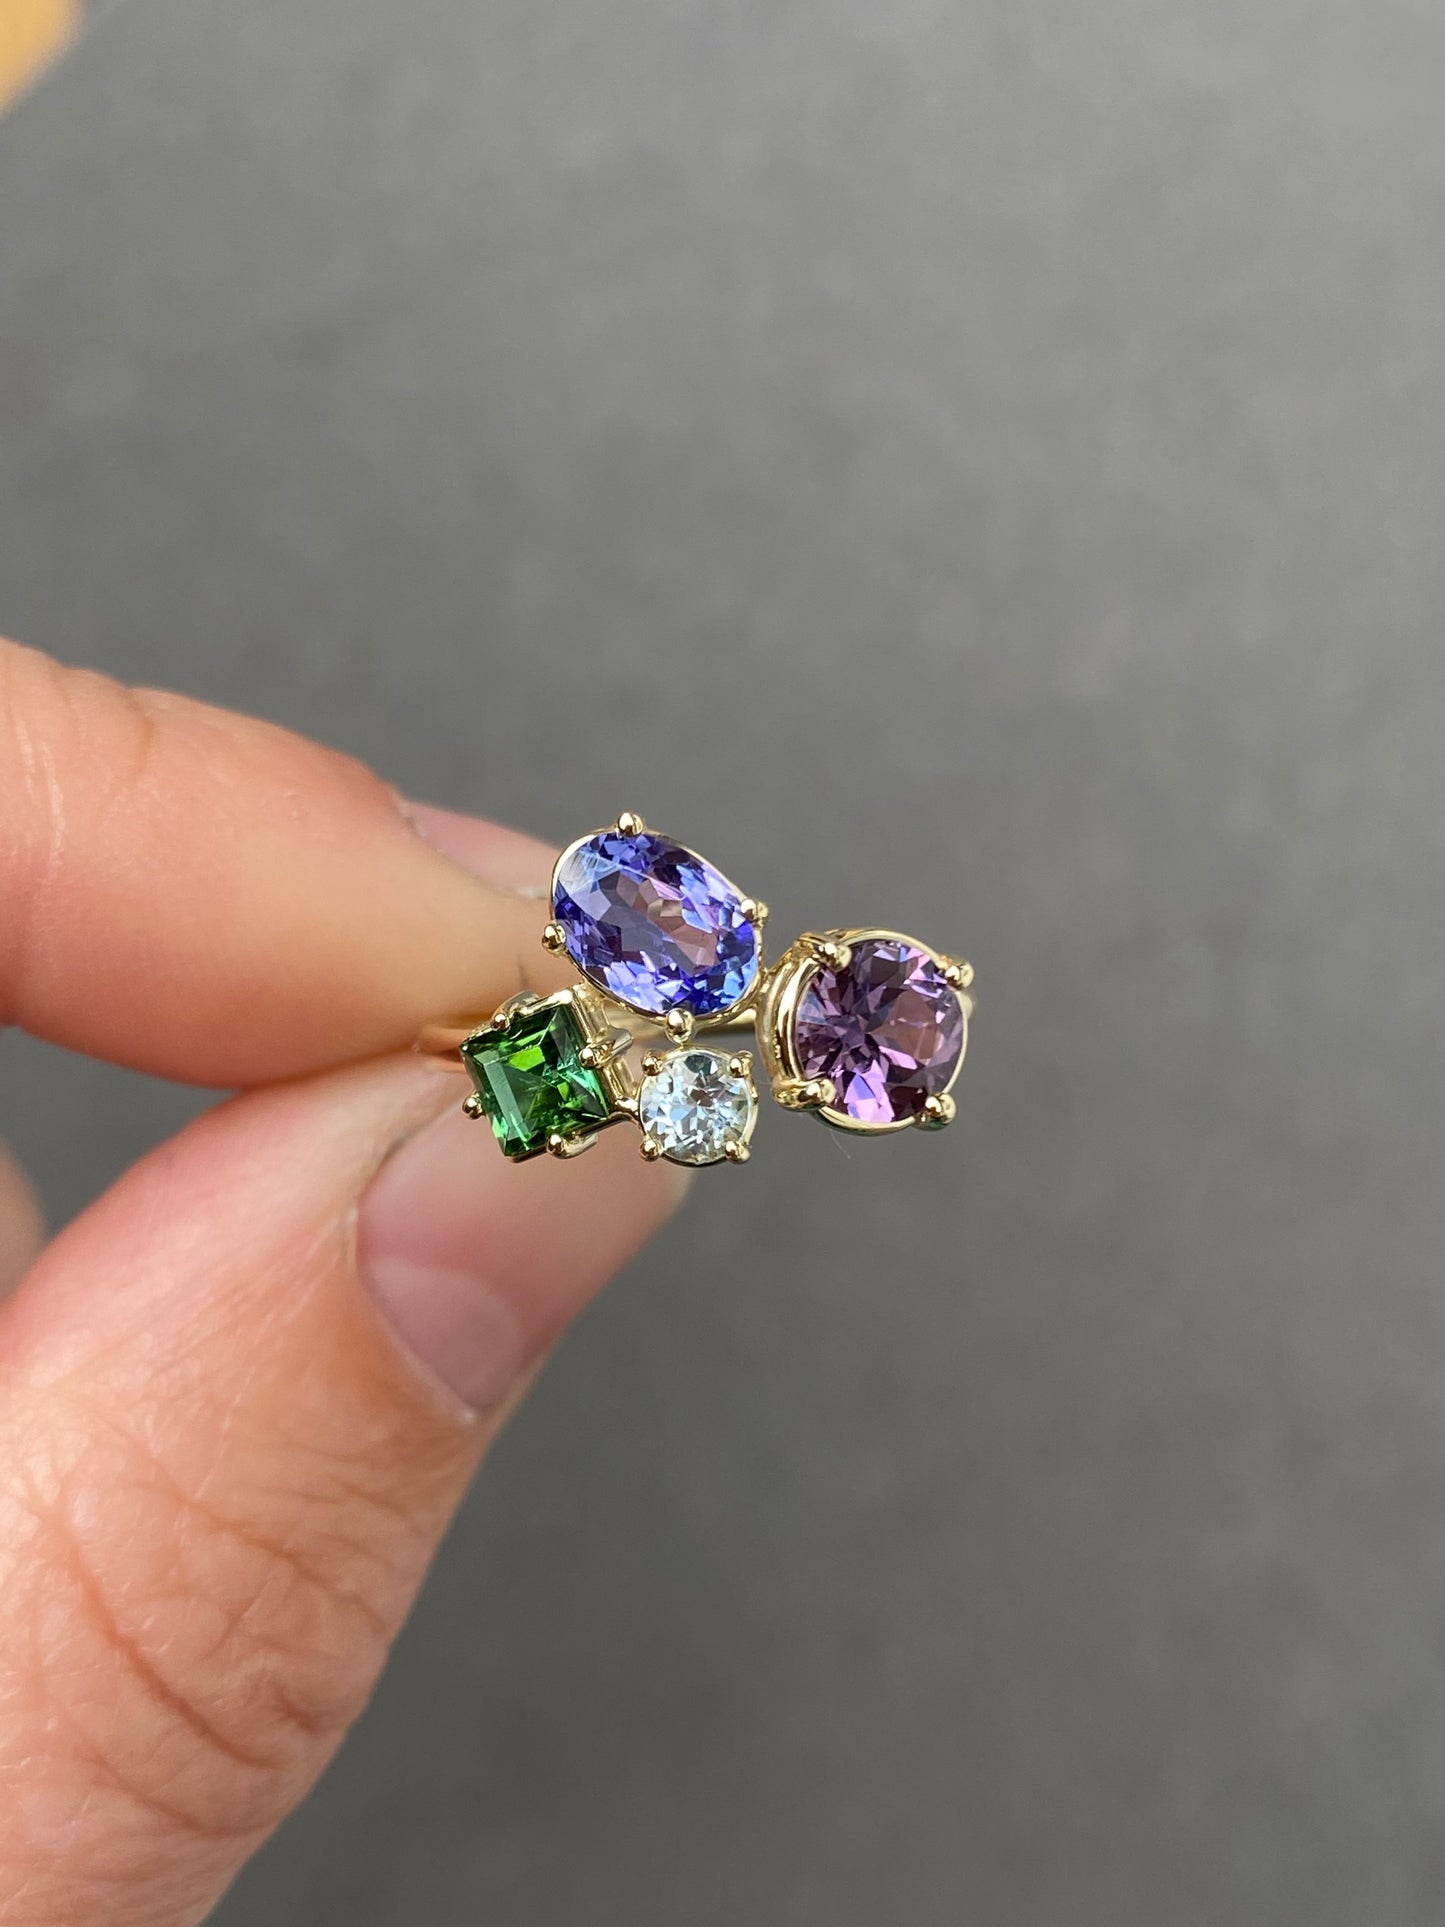 Mosaic ring with Tanzanite, Spinel, Tourmaline and Blue Topaz in 14k yellow gold